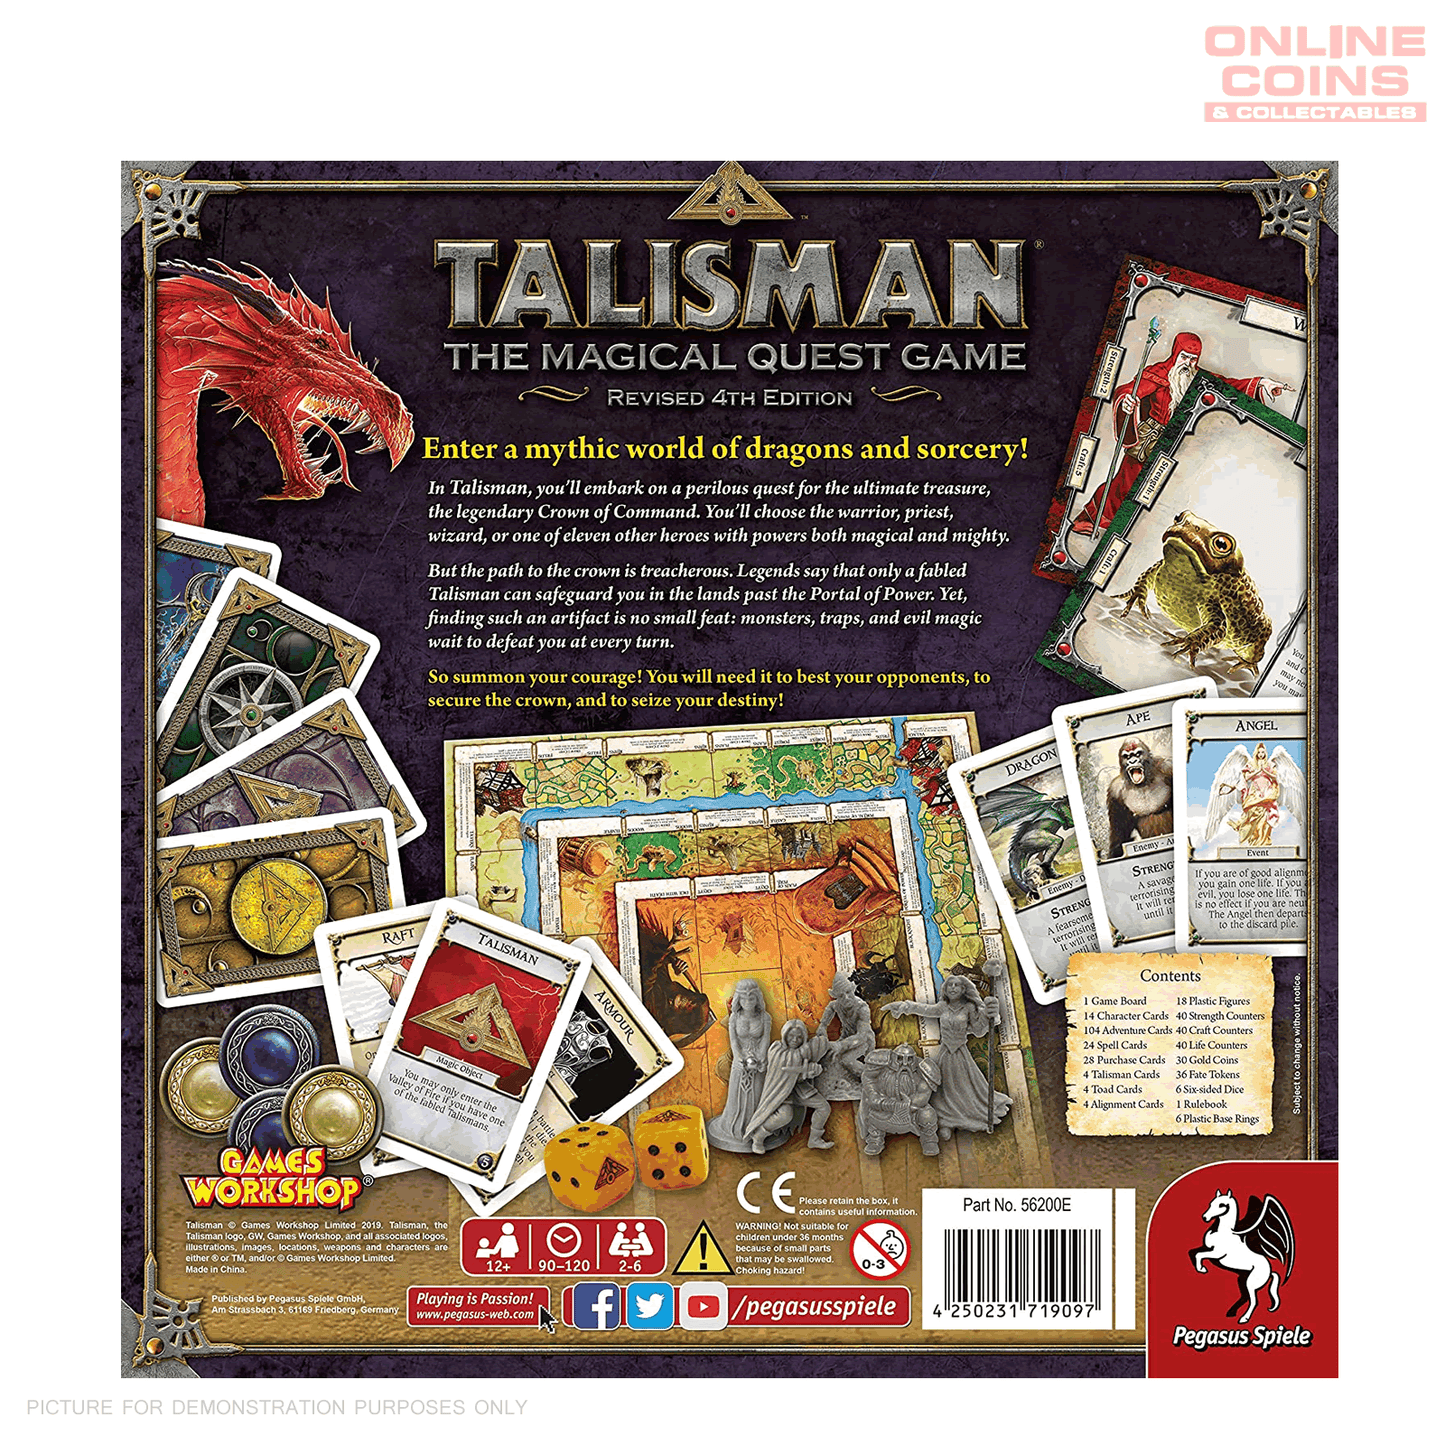 Talisman 4th Edition - The Magical Quest Game